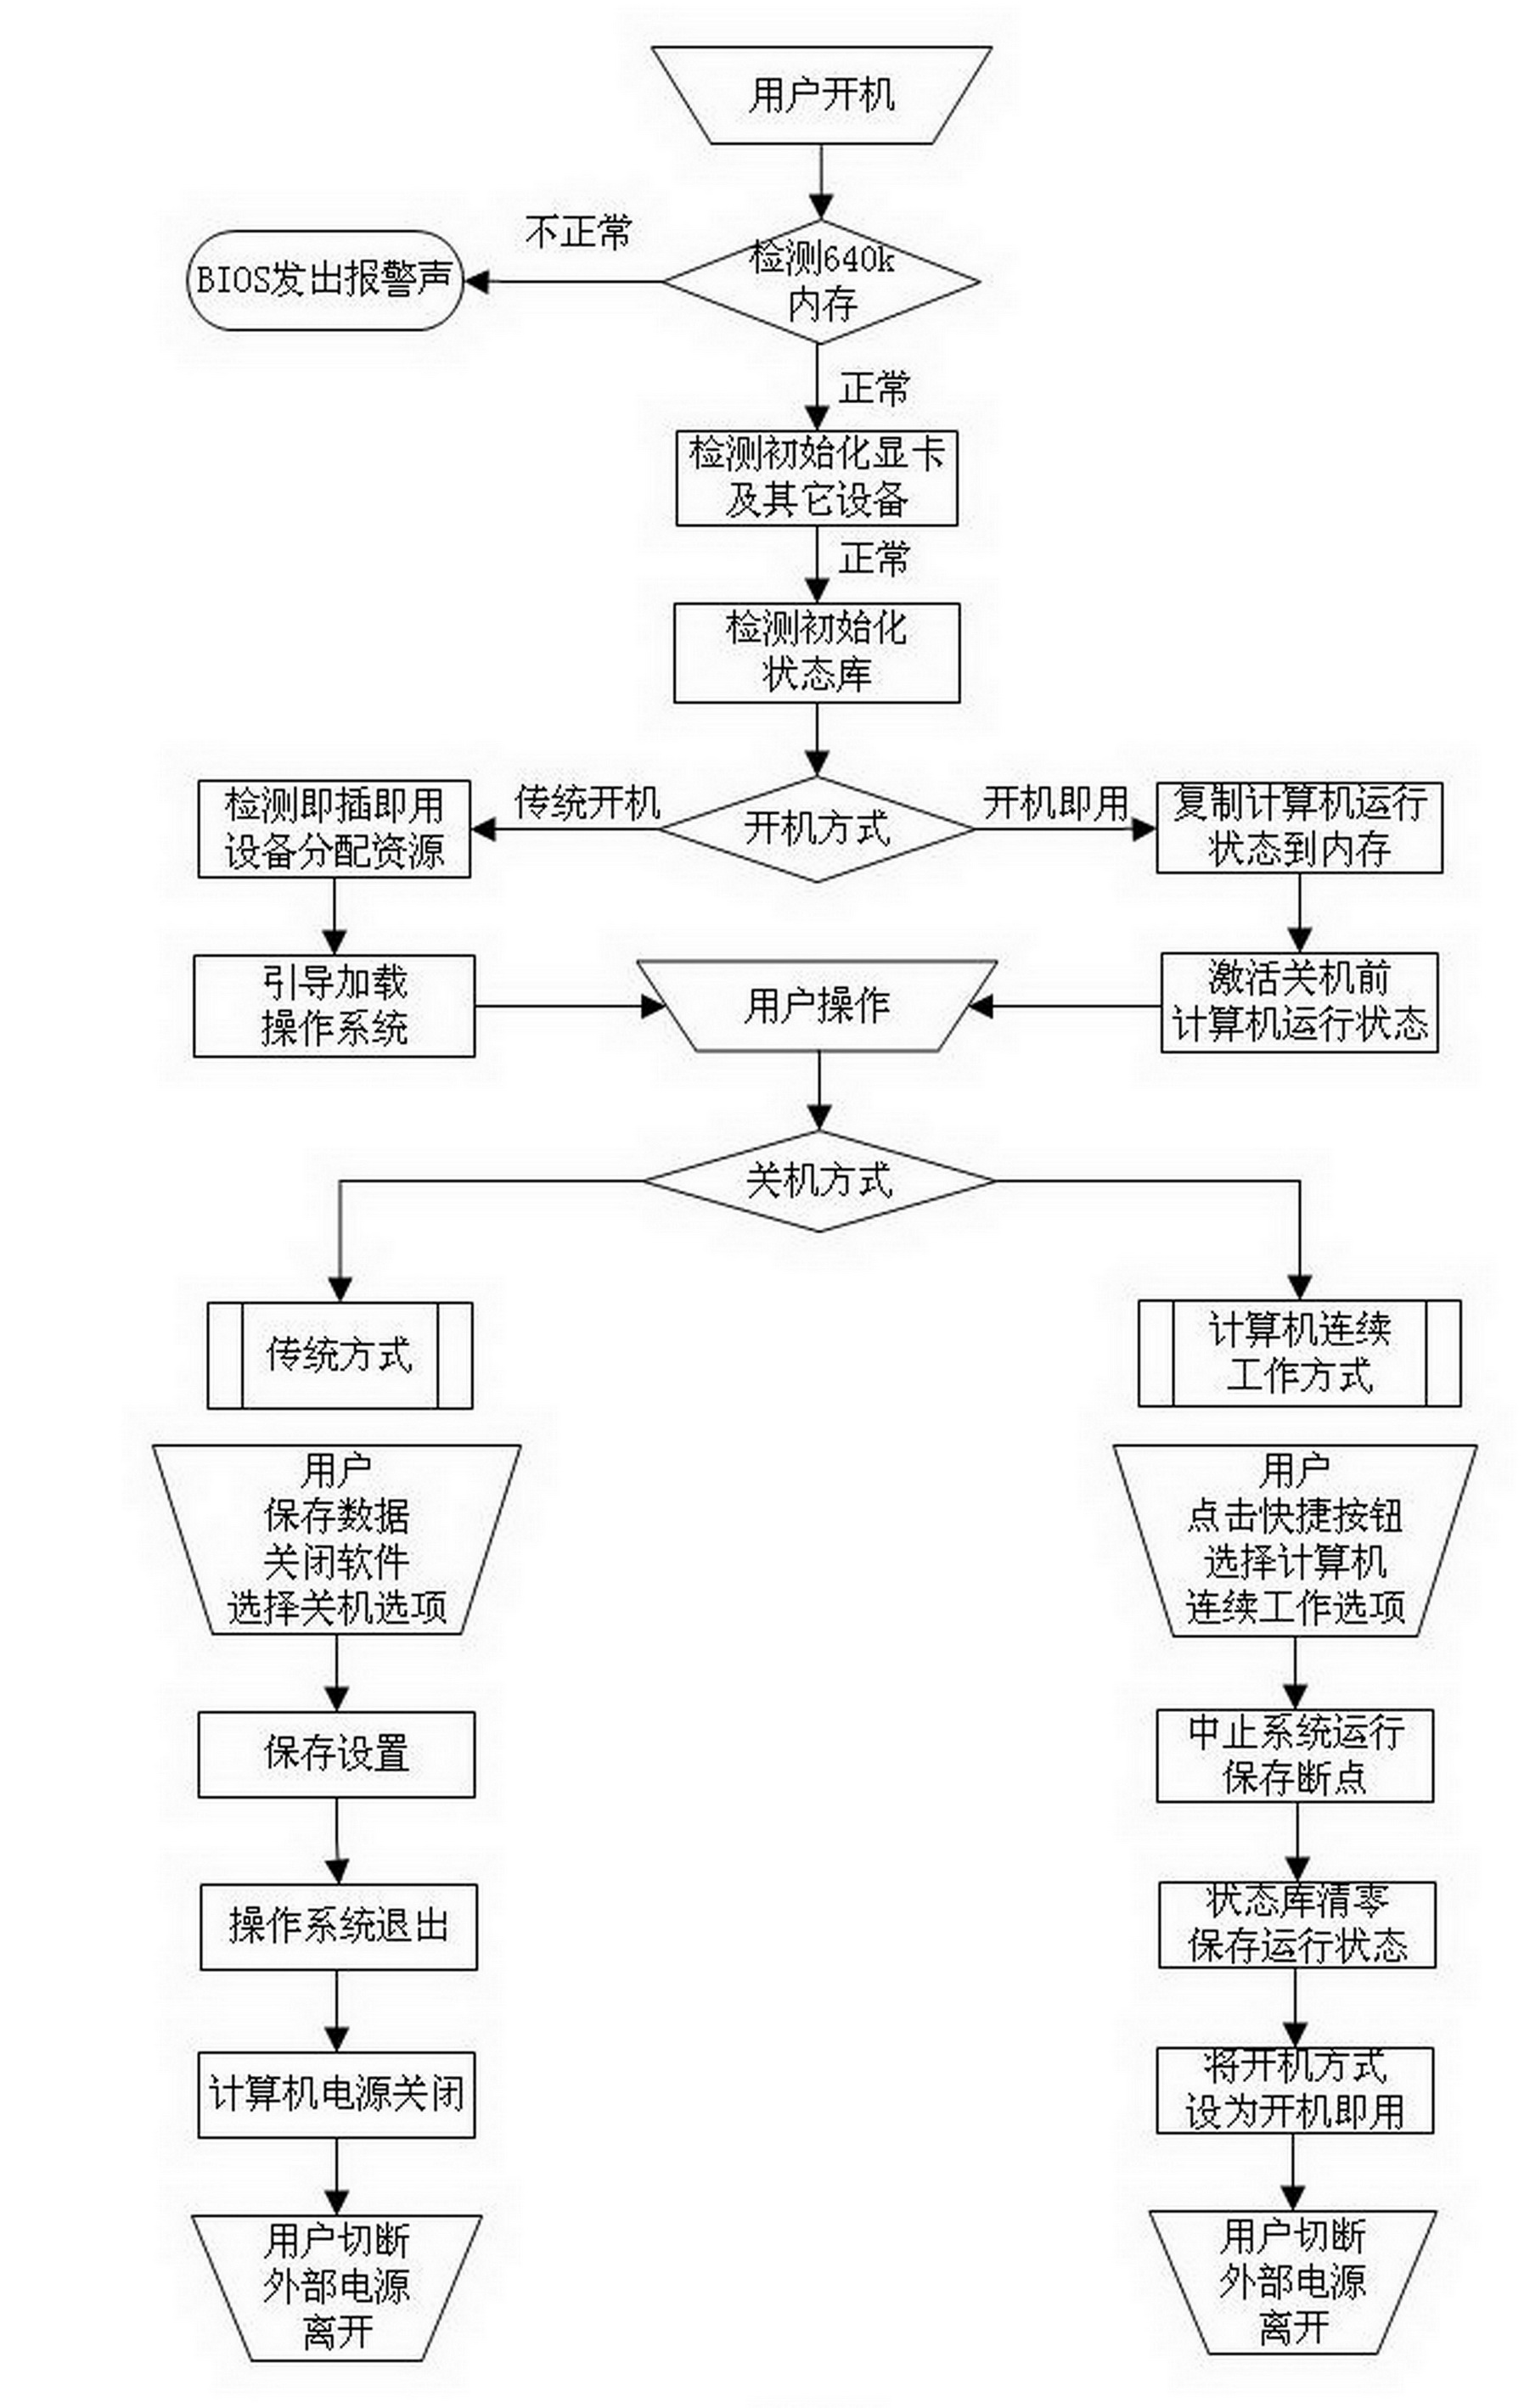 Method for improving work efficiency of computer and novel computer system thereof